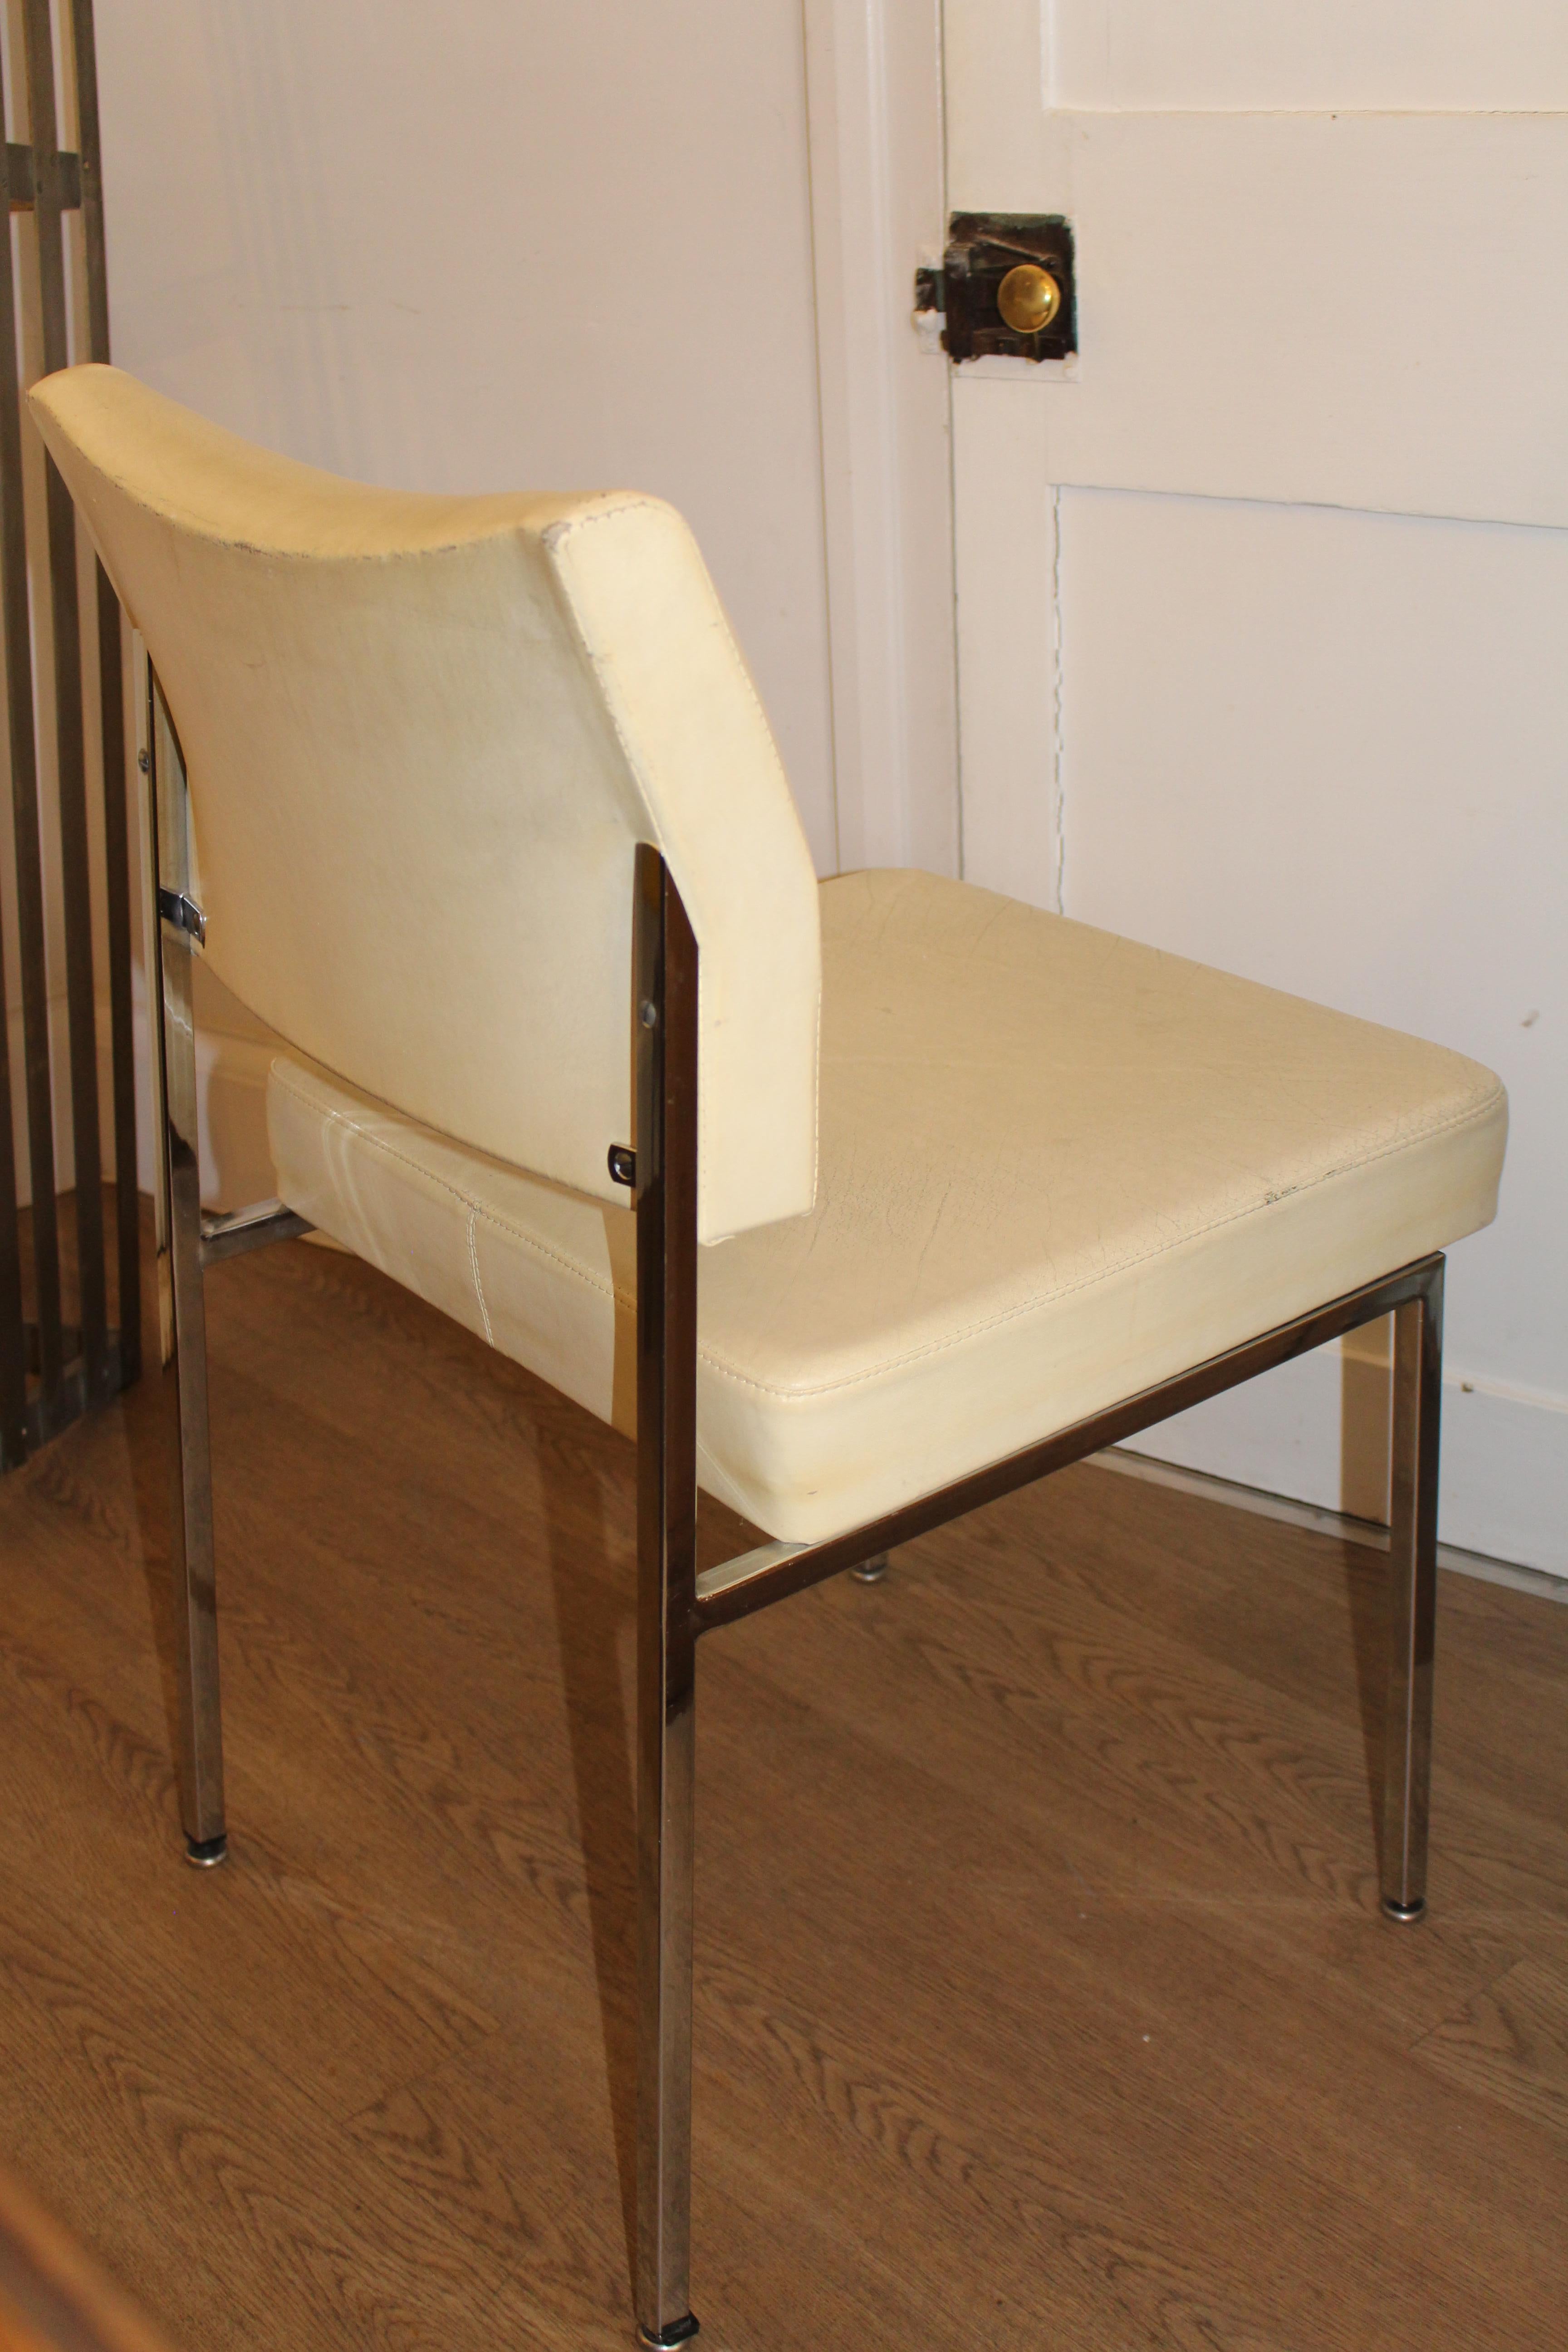 French 1970's Mid Century Chrome Steel Cream Skai Faux Leather Dining Desk Design Chair For Sale